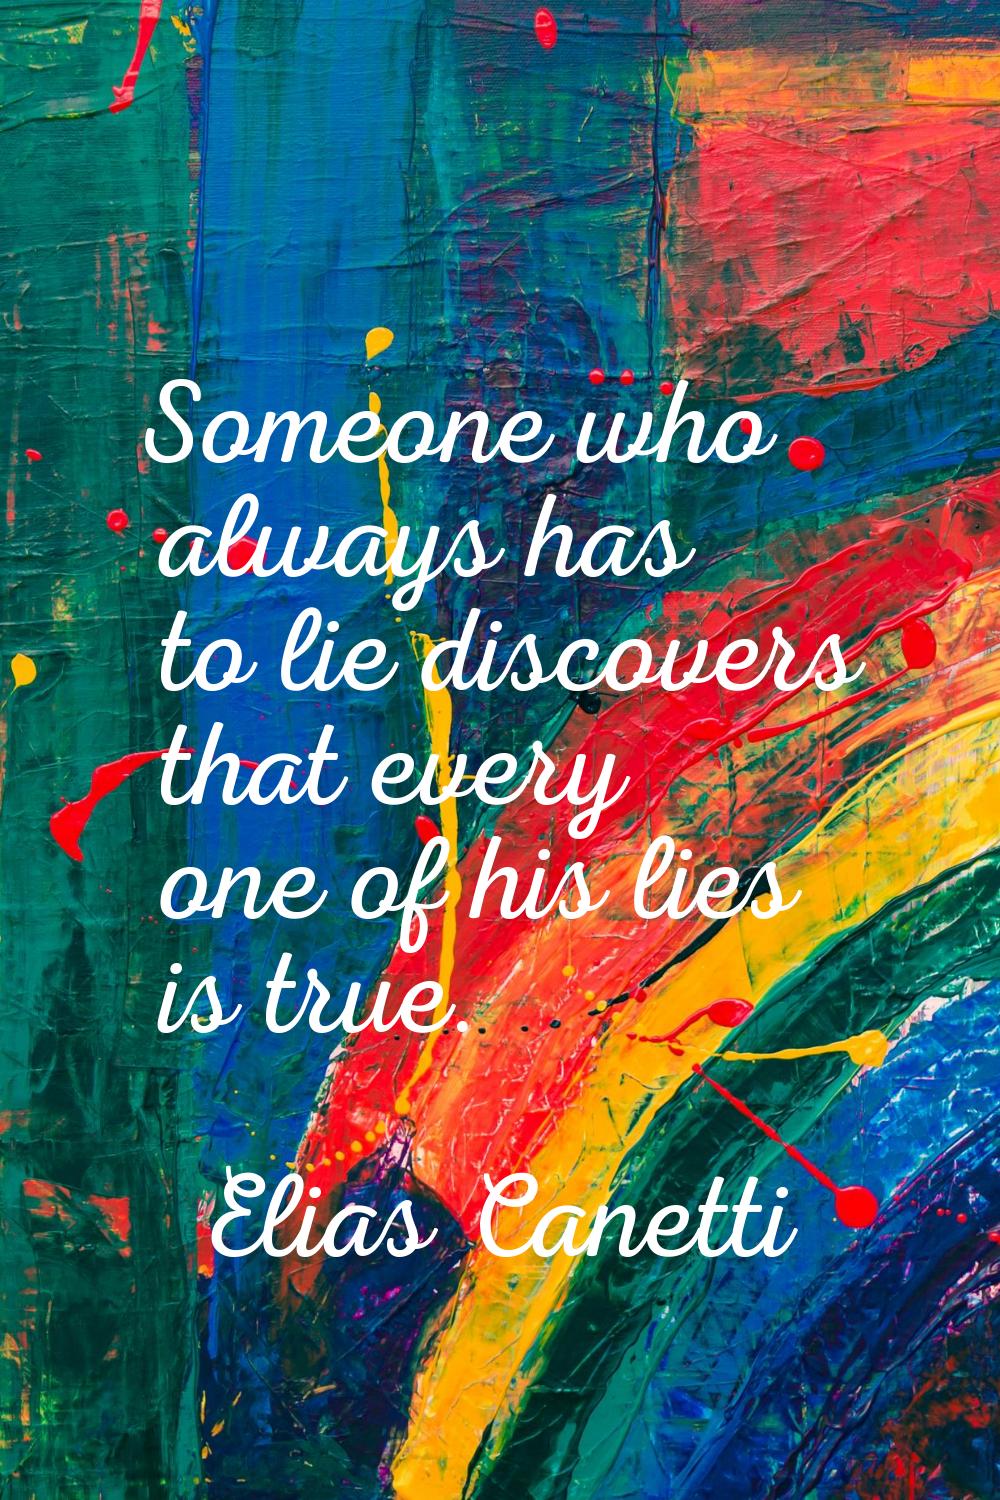 Someone who always has to lie discovers that every one of his lies is true.